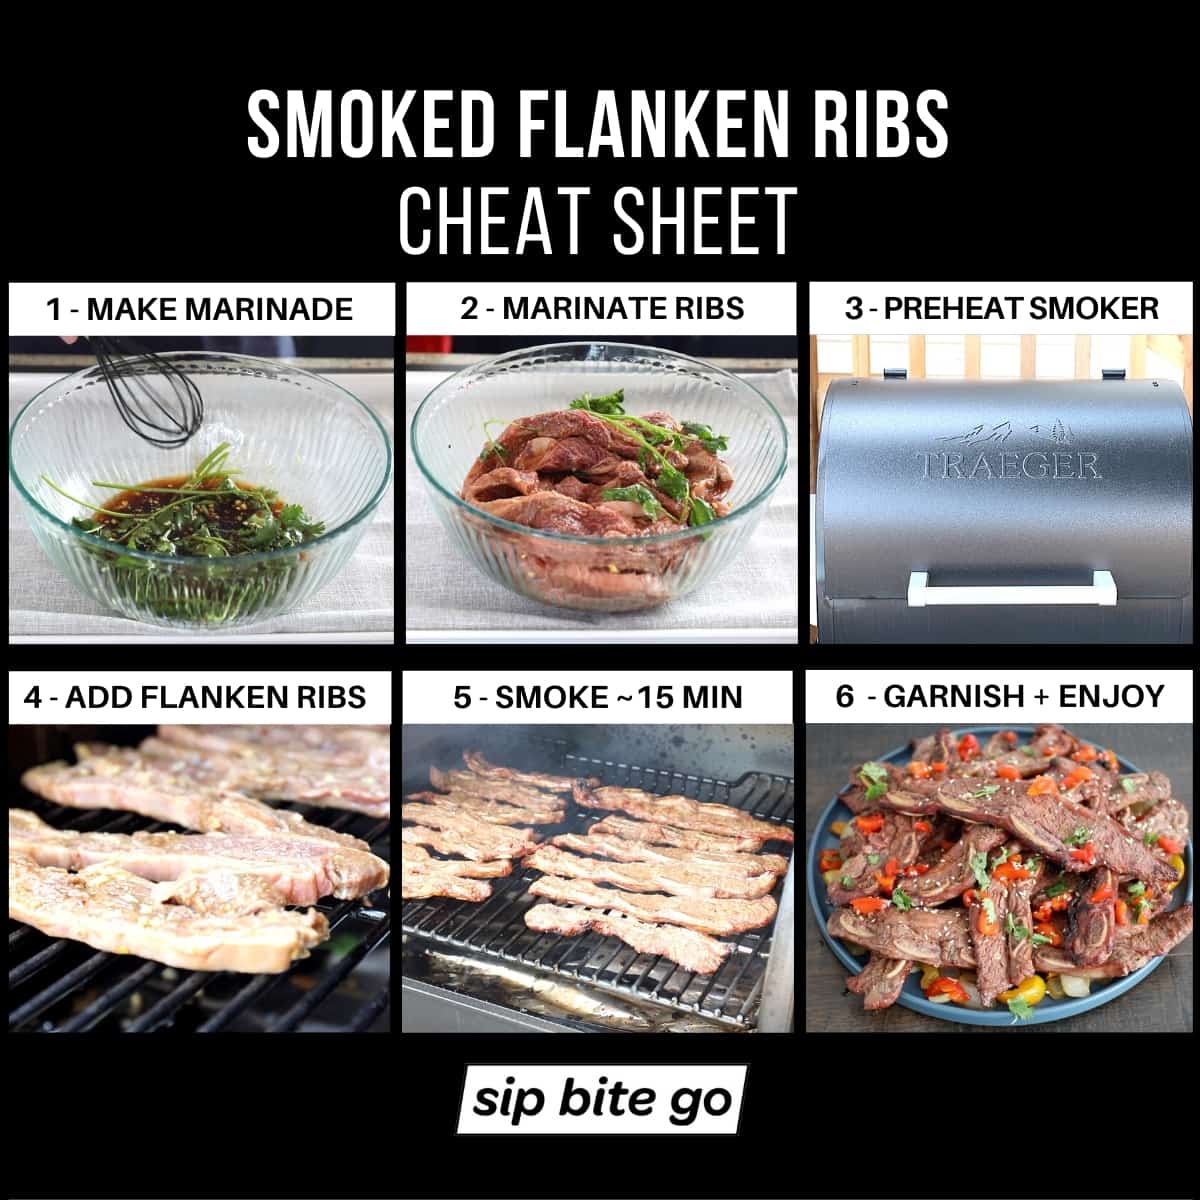 Infographic cooking instructions on how to make smoked flanken ribs Traeger smoker style